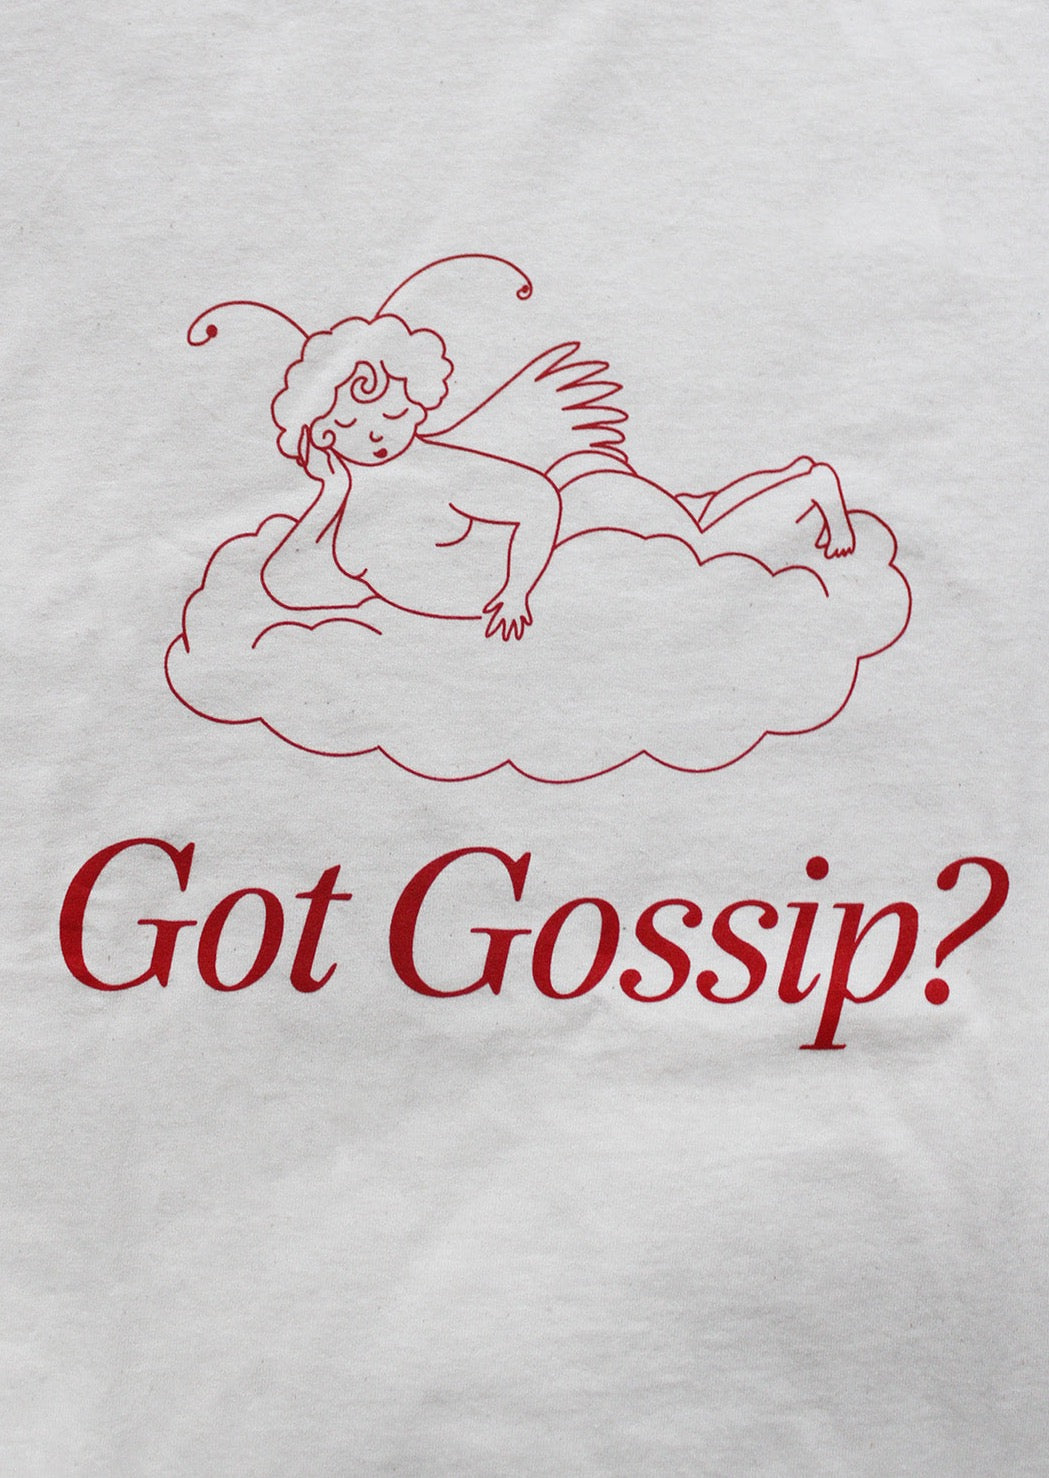 Hot off the press, if you've got gossip we've got the perfect tee for you. 